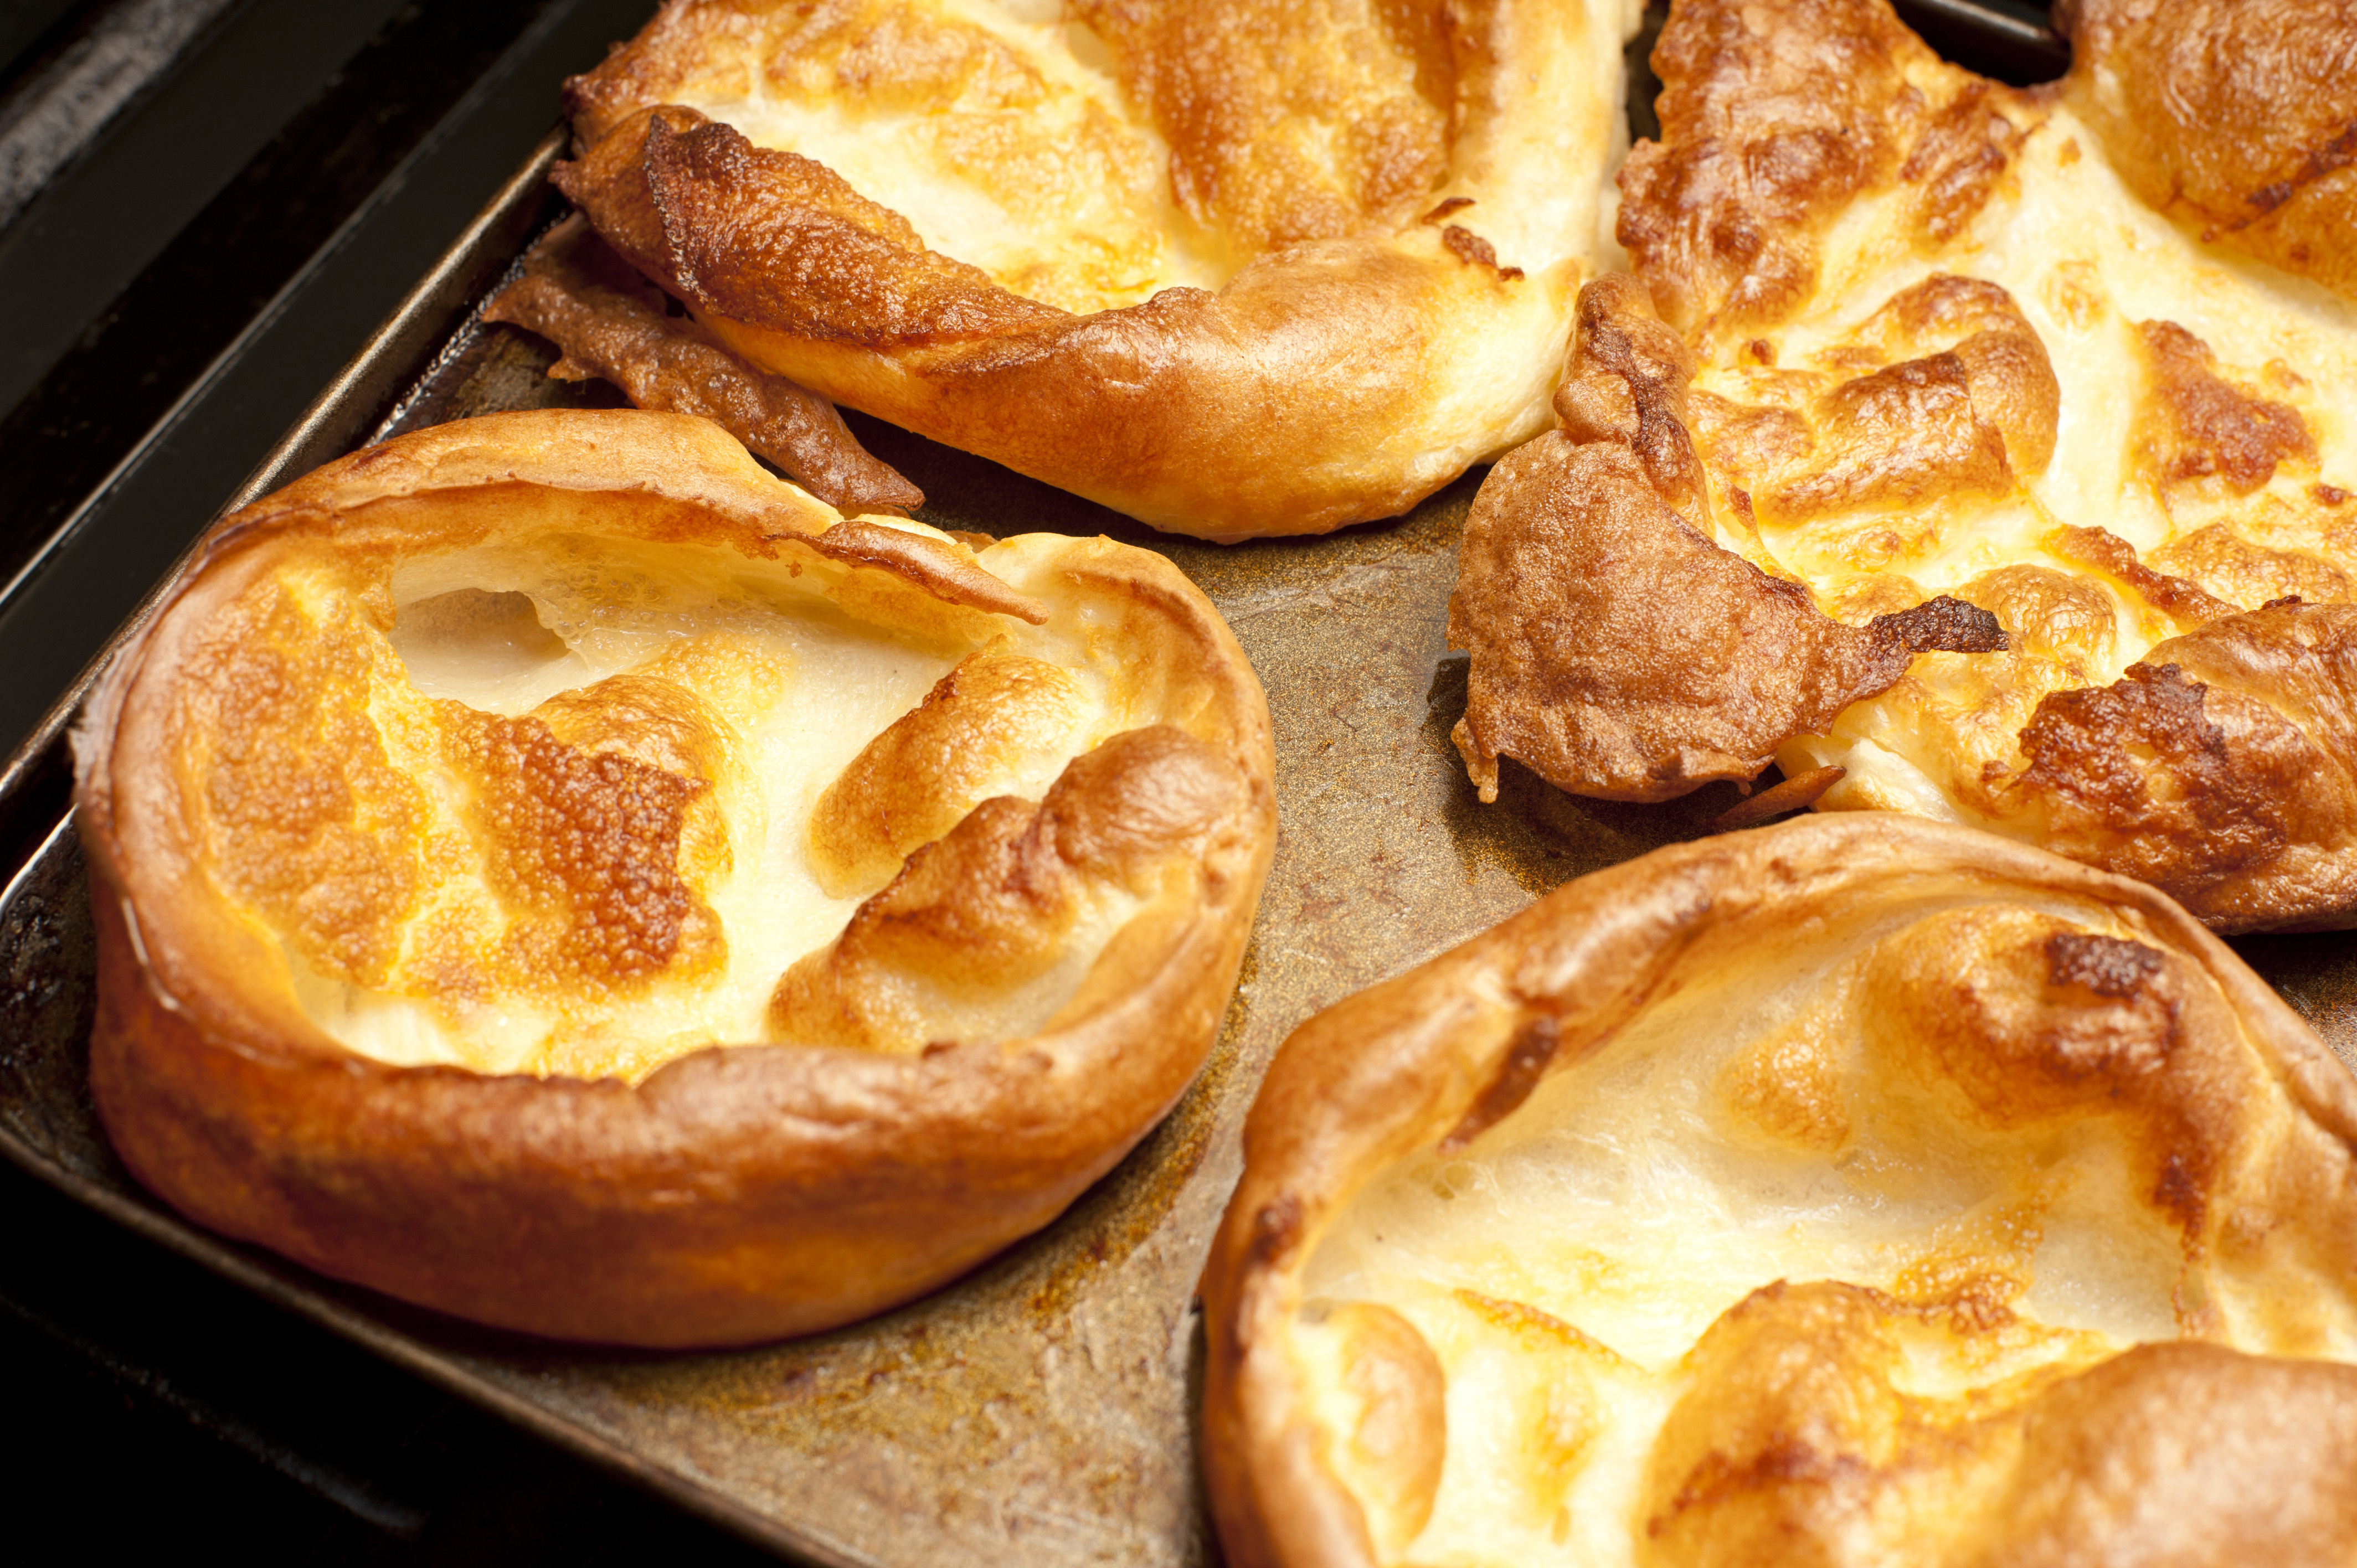 Yorkshire puddings, yorkshire food